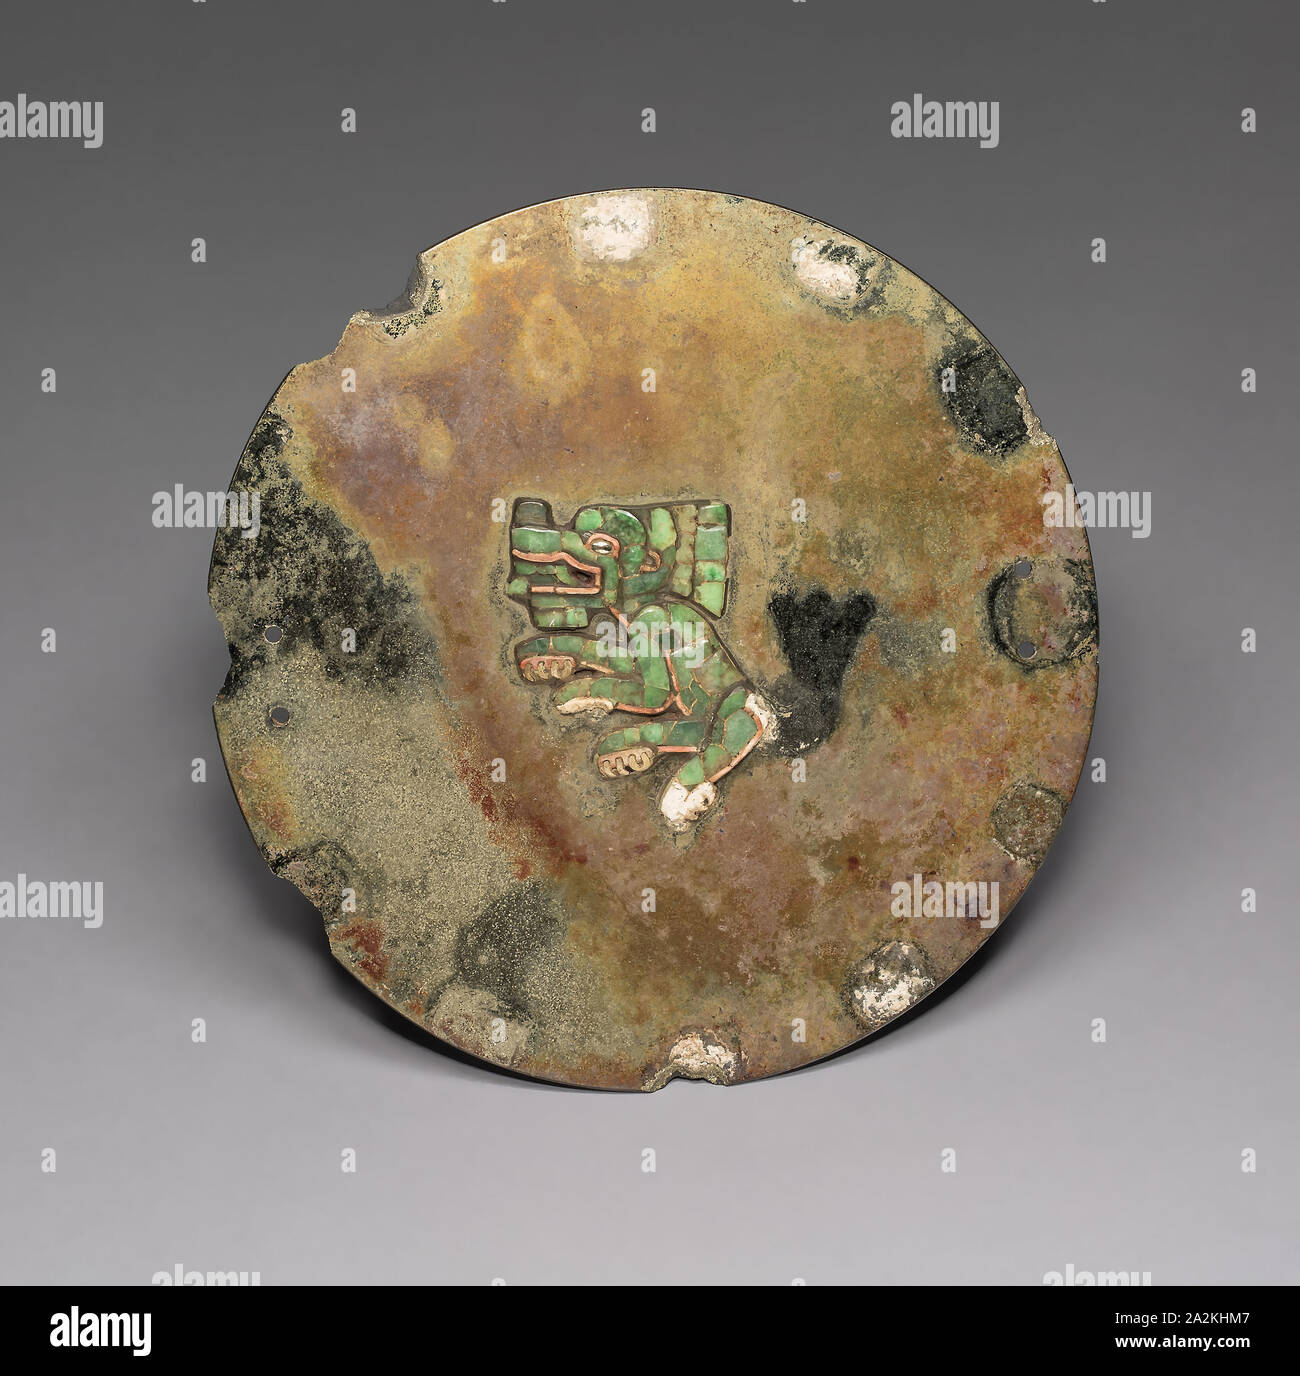 Mirror with Jaguar or Coyote Mosaic, A.D. 500/600, Teotihuacan, Teotihuacan, Mexico, México, Iron pyrite, jade, shell, magnatite or ilmenite, and spondylus shell, Diam. 19.1 cm (7 1/2 in Stock Photo